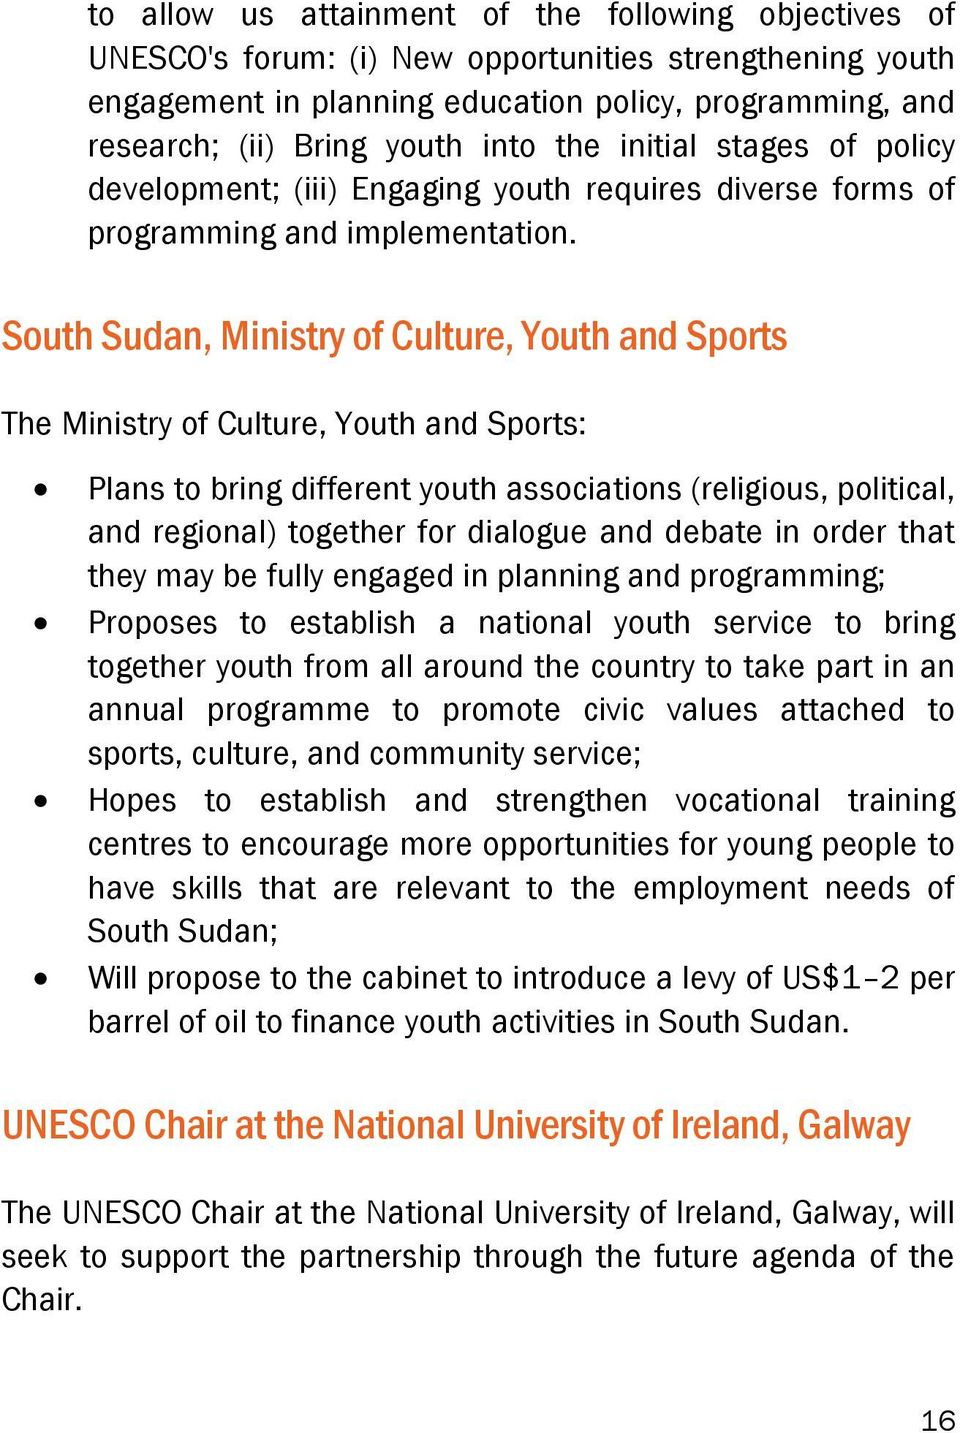 South Sudan, Ministry of Culture, Youth and Sports The Ministry of Culture, Youth and Sports: Plans to bring different youth associations (religious, political, and regional) together for dialogue